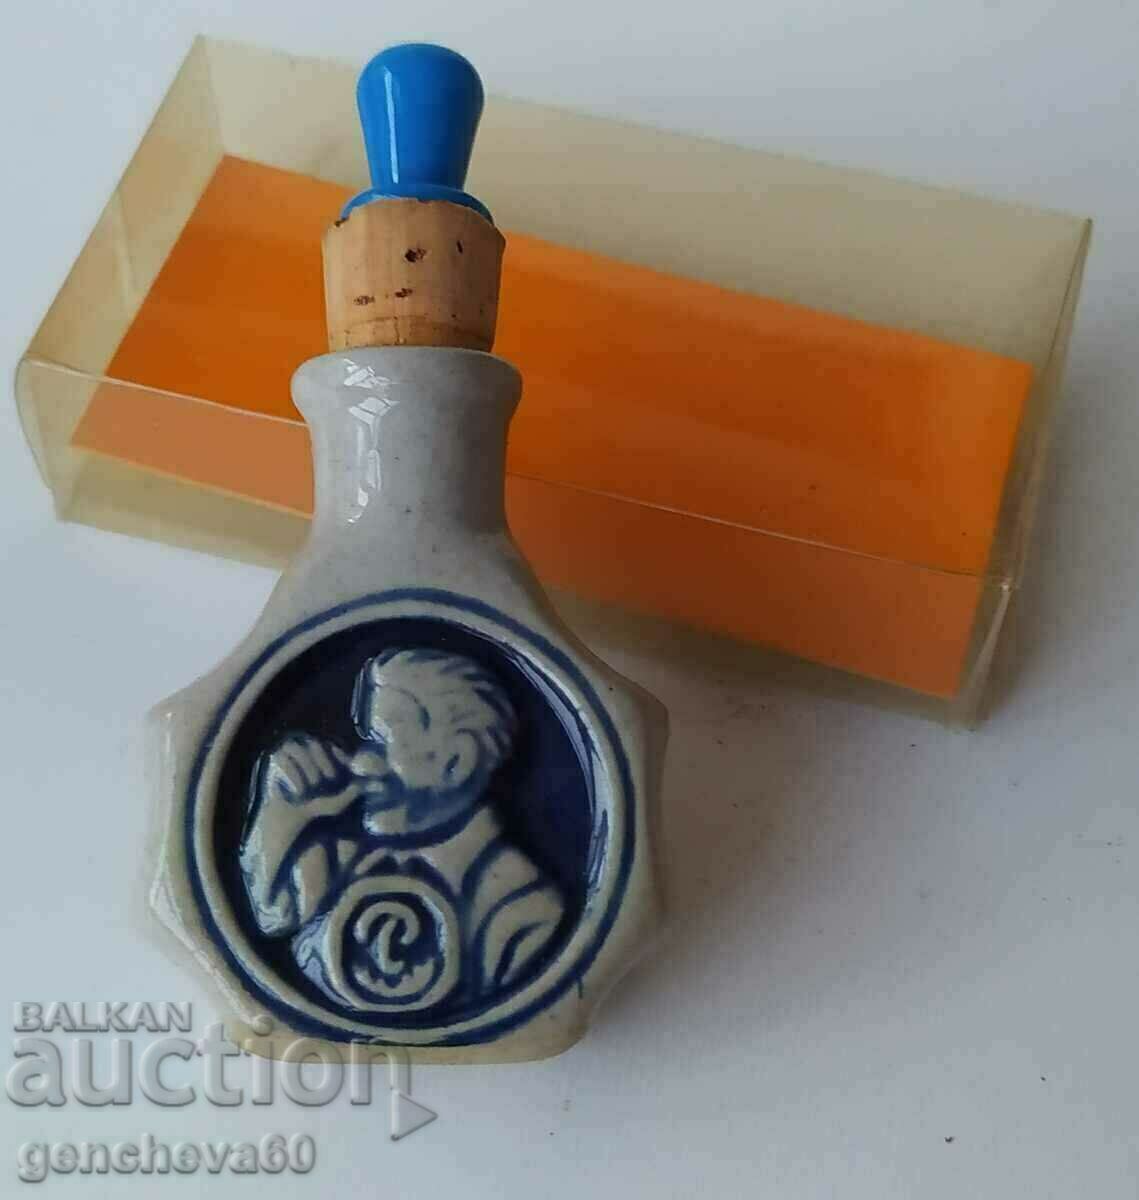 Old collectible snuff bottle